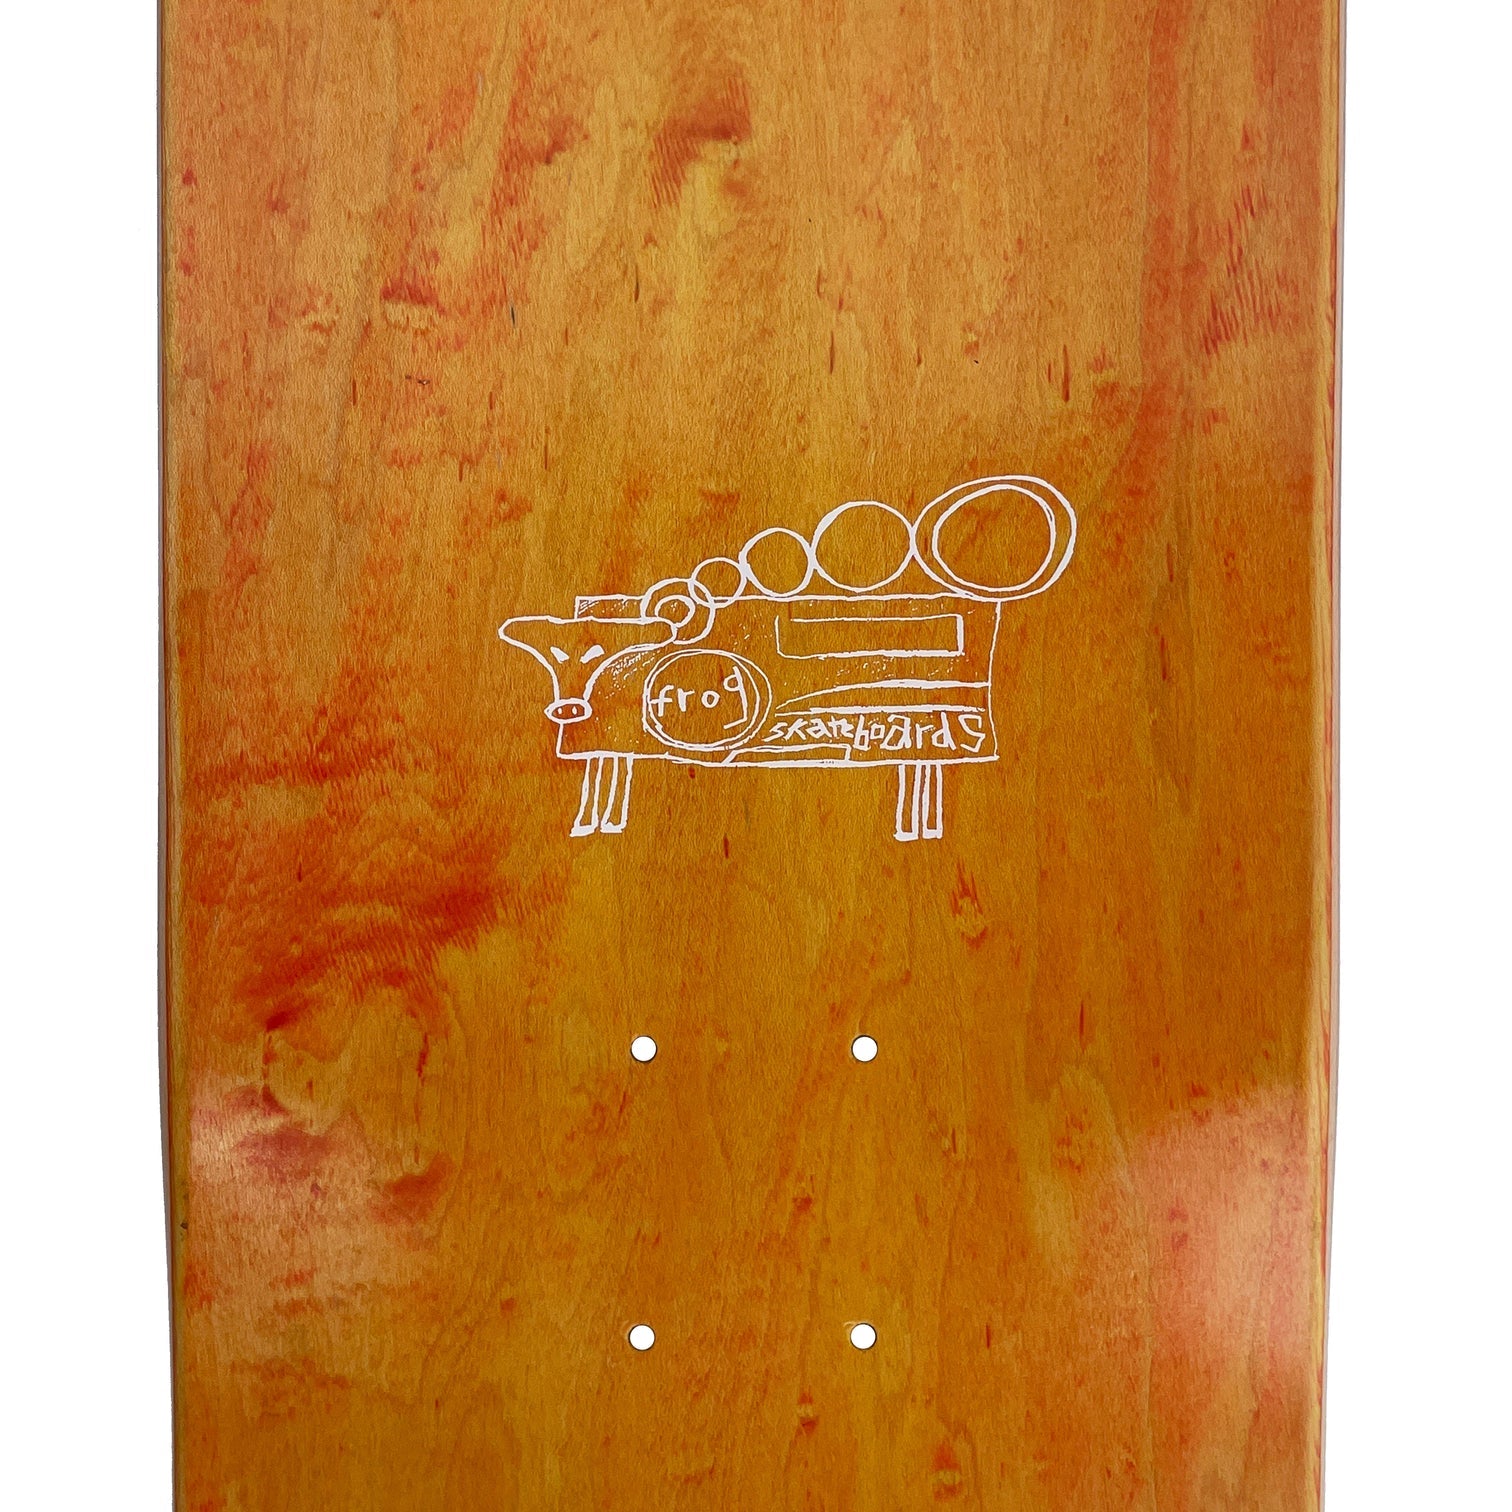 FROG DECK PAINTED COW DUSTIN HENRY (8.25"/8.5") - The Drive Skateshop